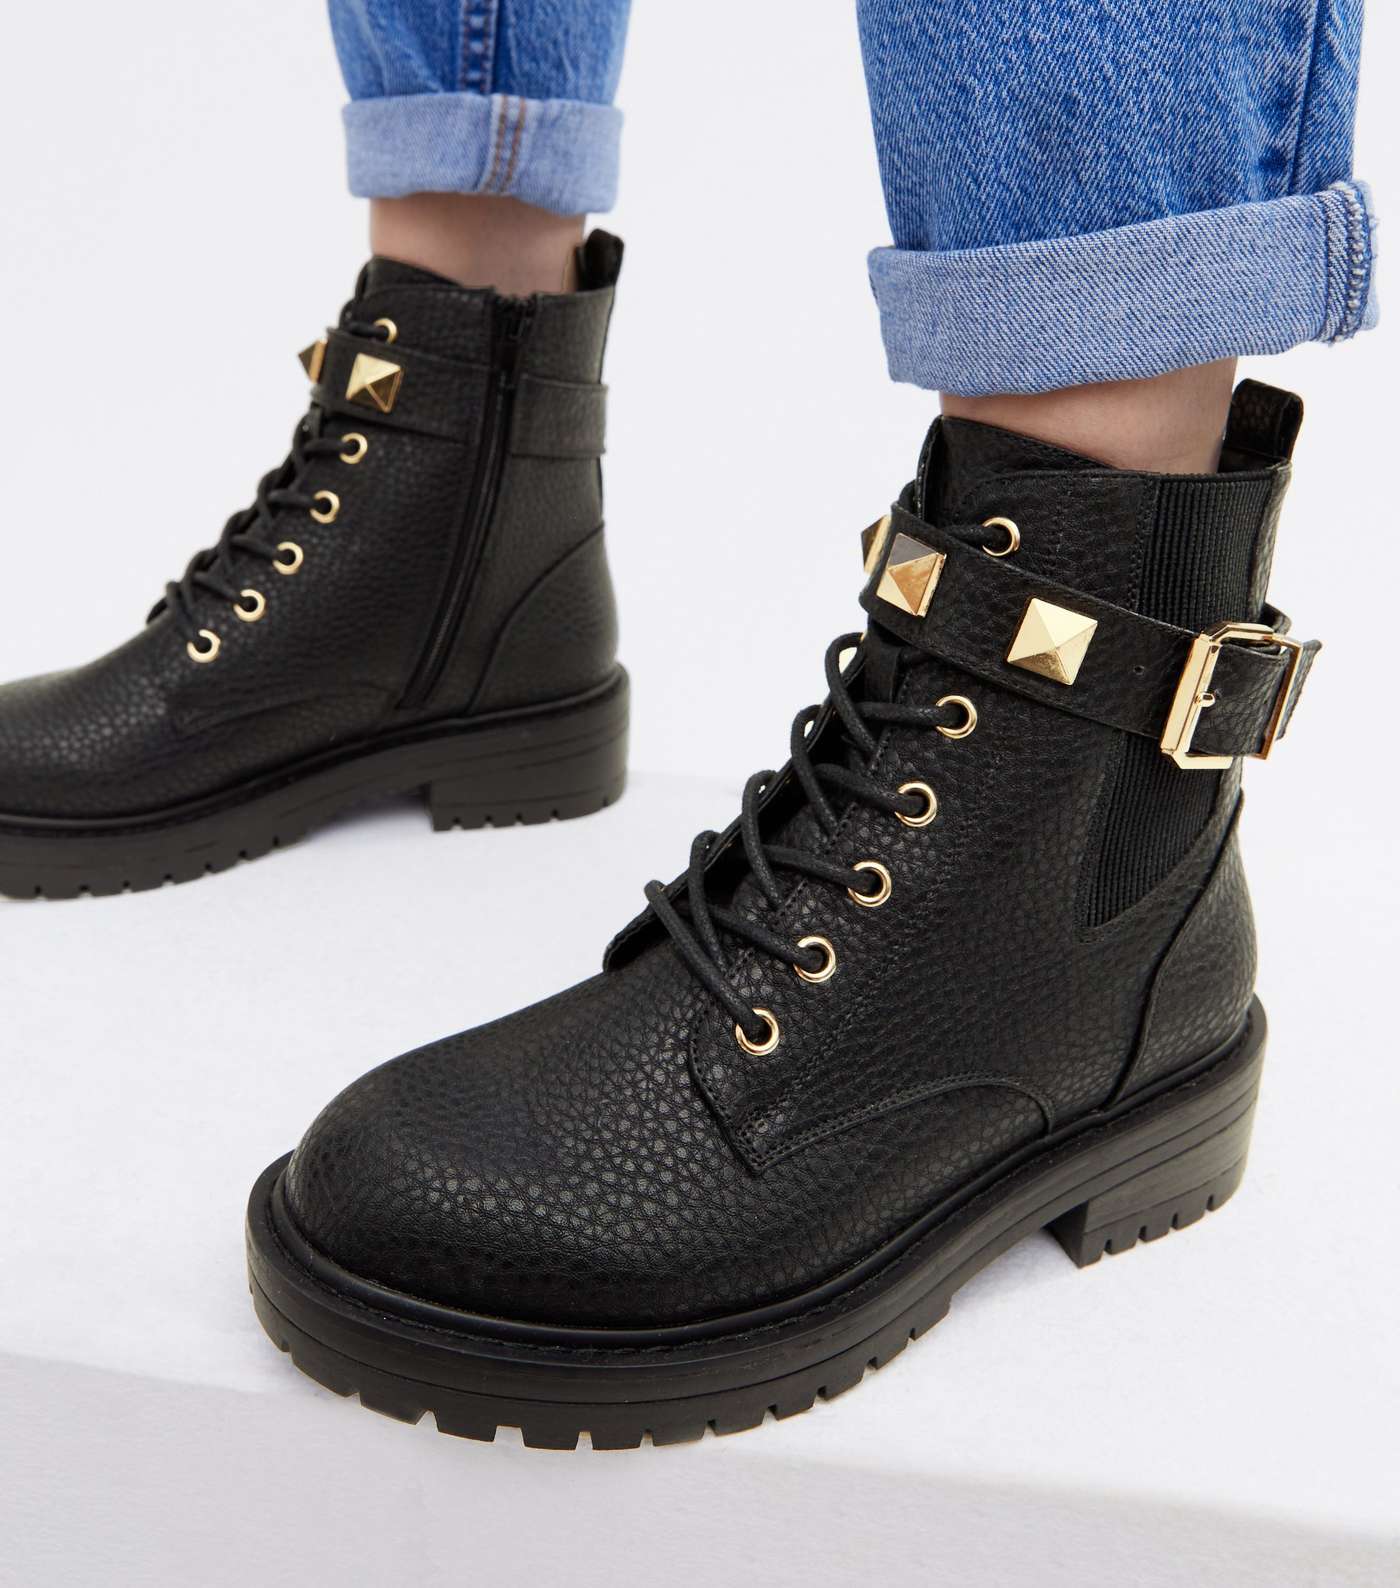 Wide Fit Black Studded Chunky Biker Boots Image 2